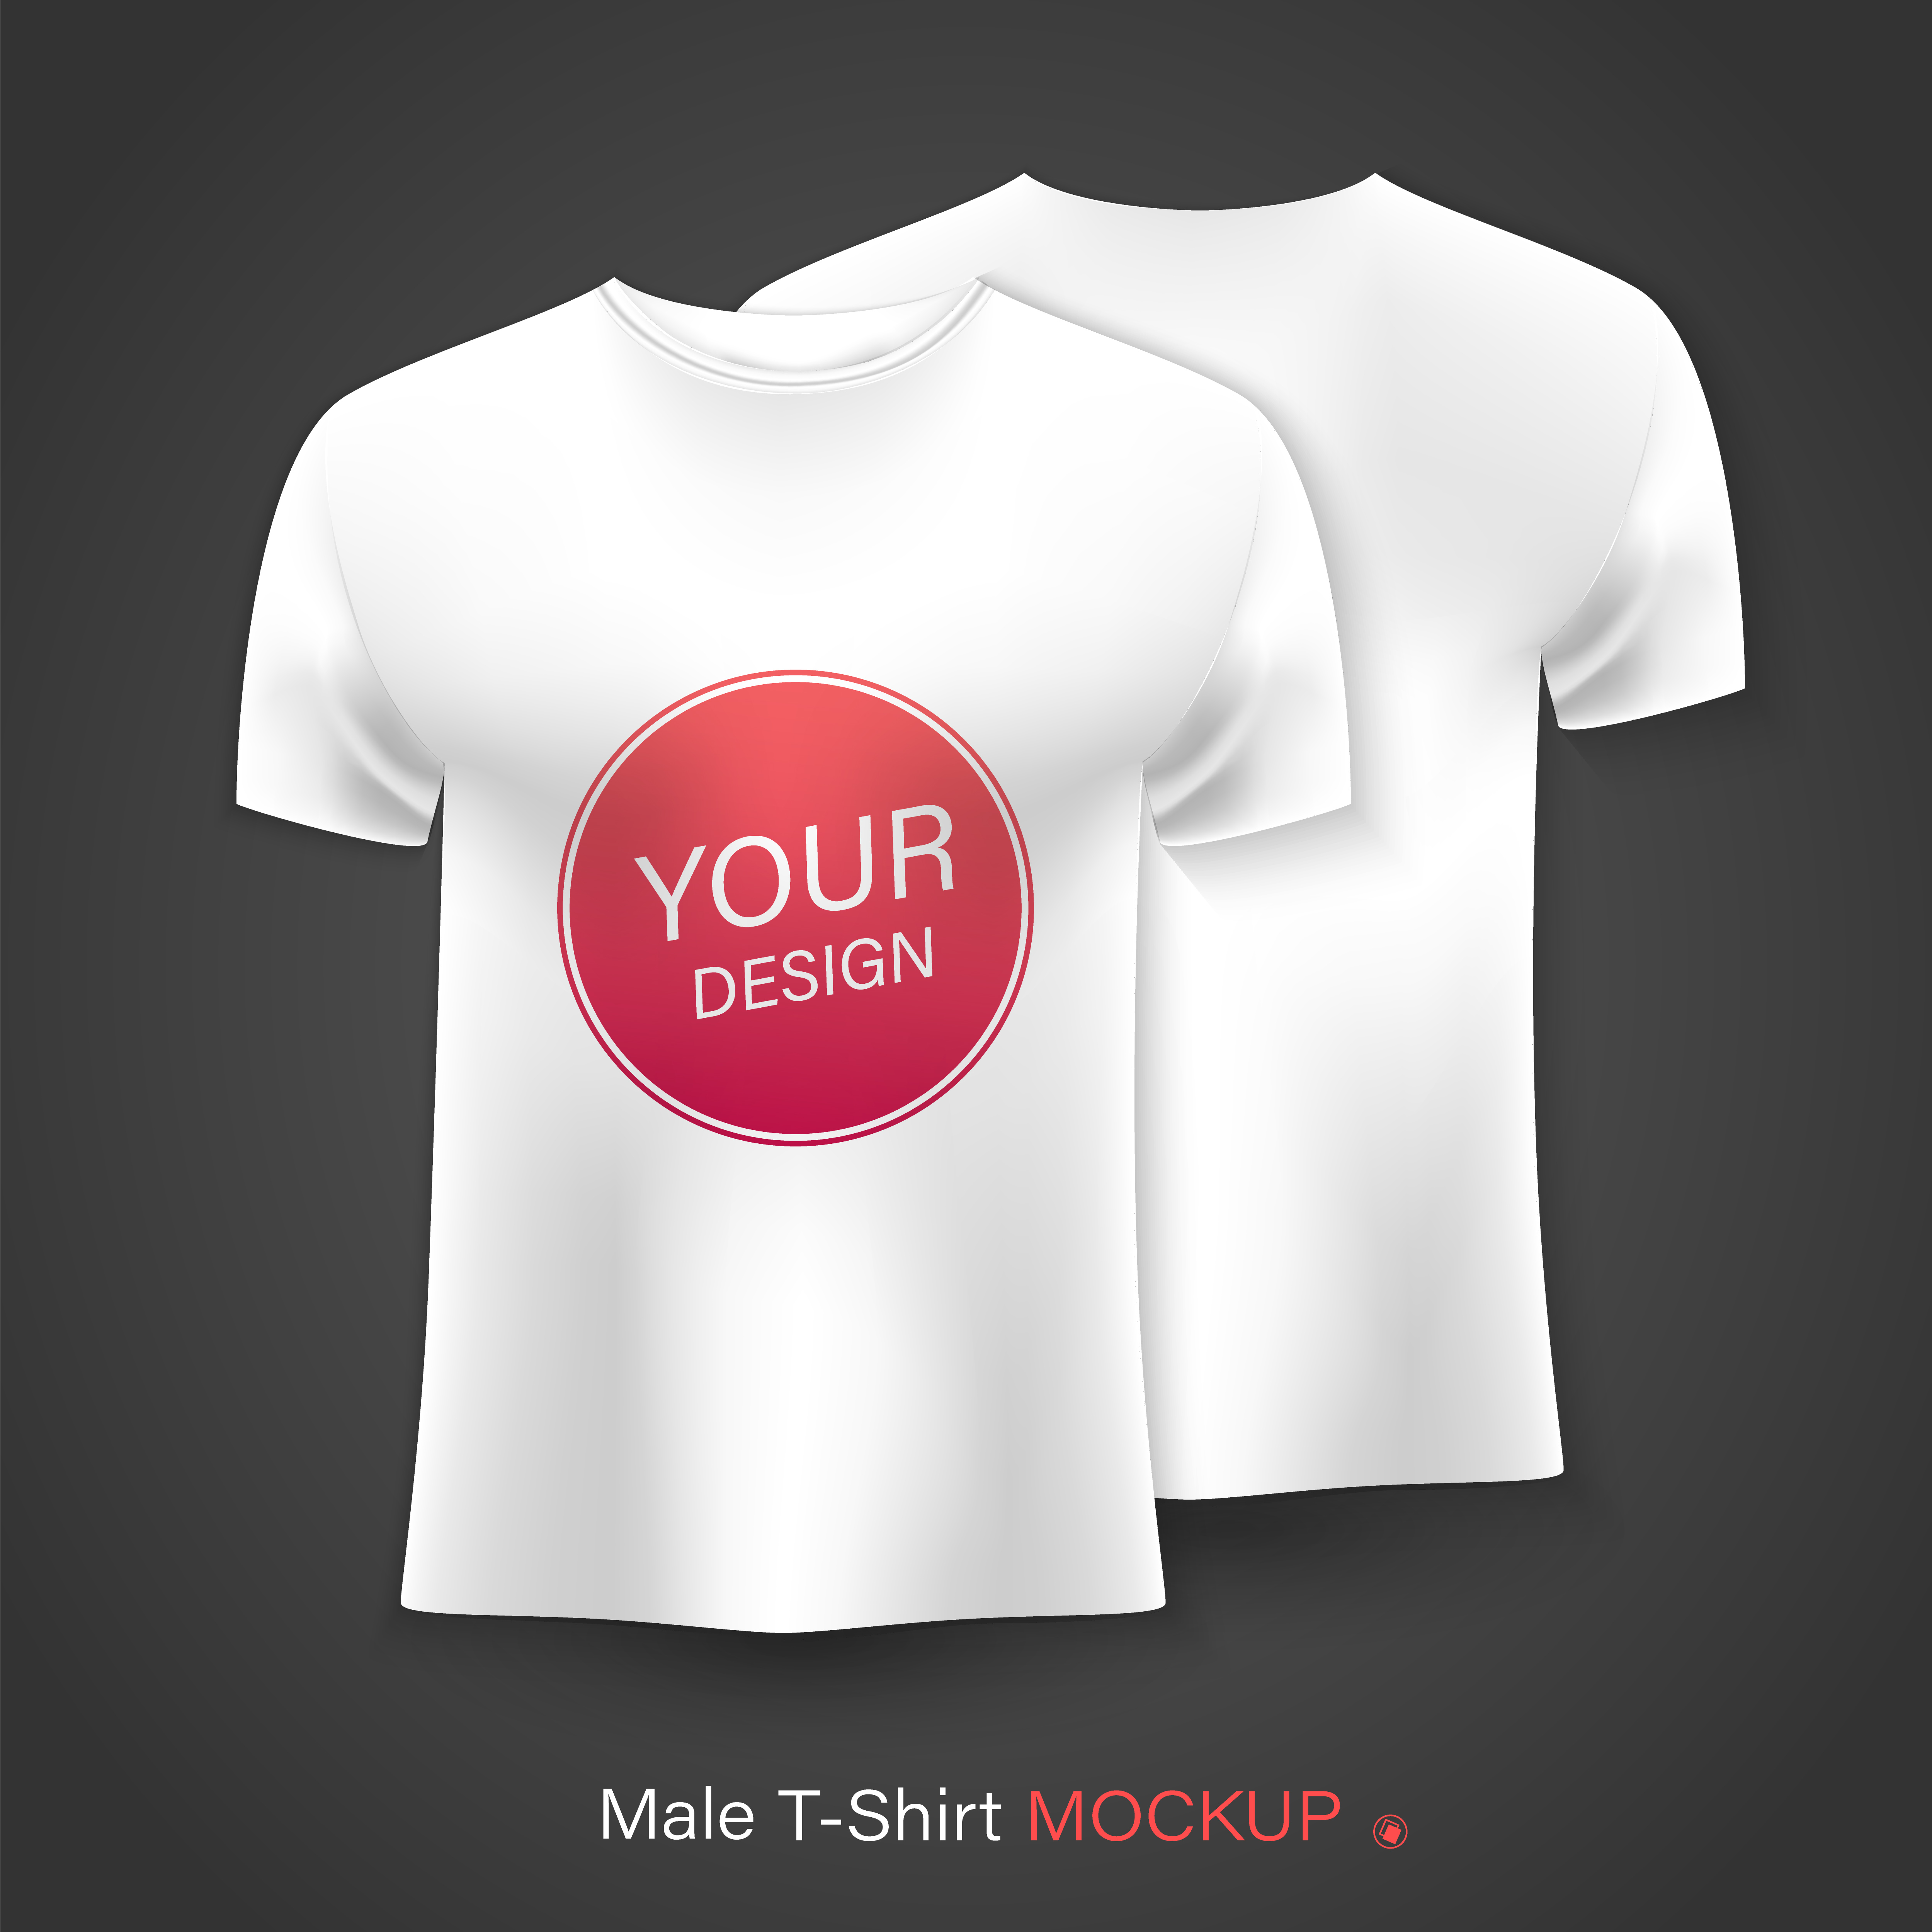 Download male t-shirt mockup Vector - Download Free Vector Art, Stock Graphics & Images